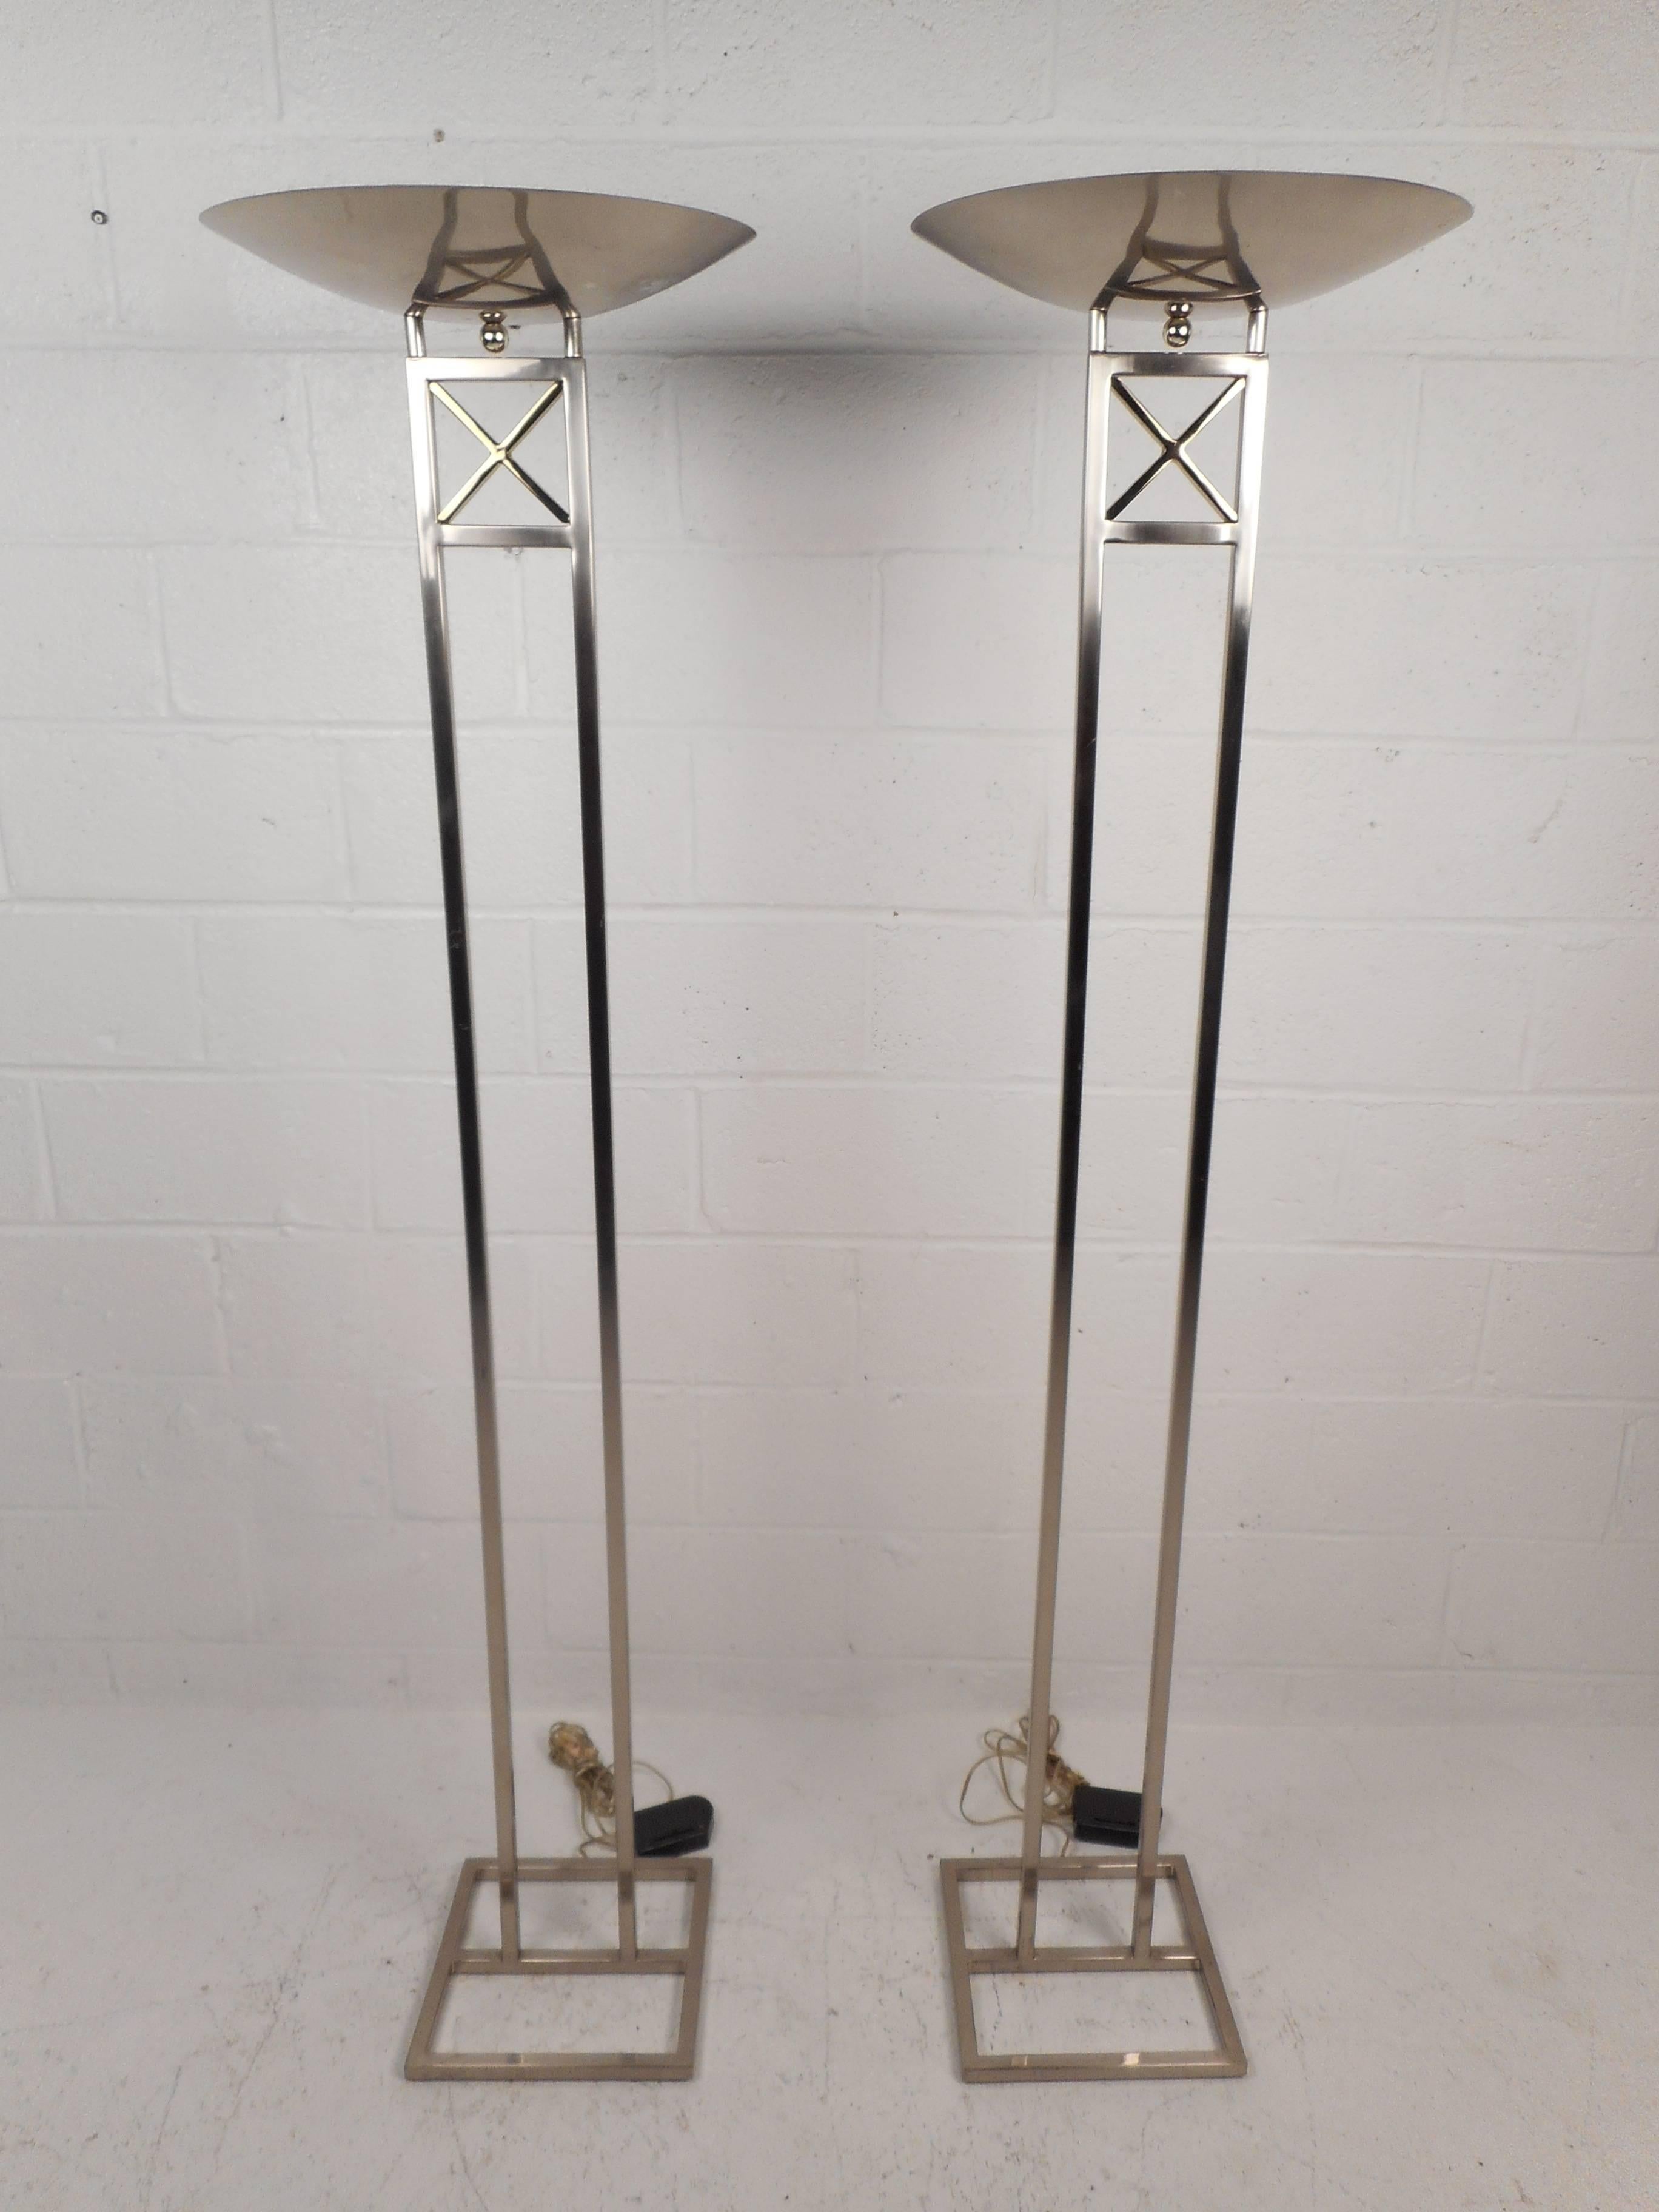 Stunning pair of Mid-Century Modern floor lamps feature a tall polished chrome frame with a 17